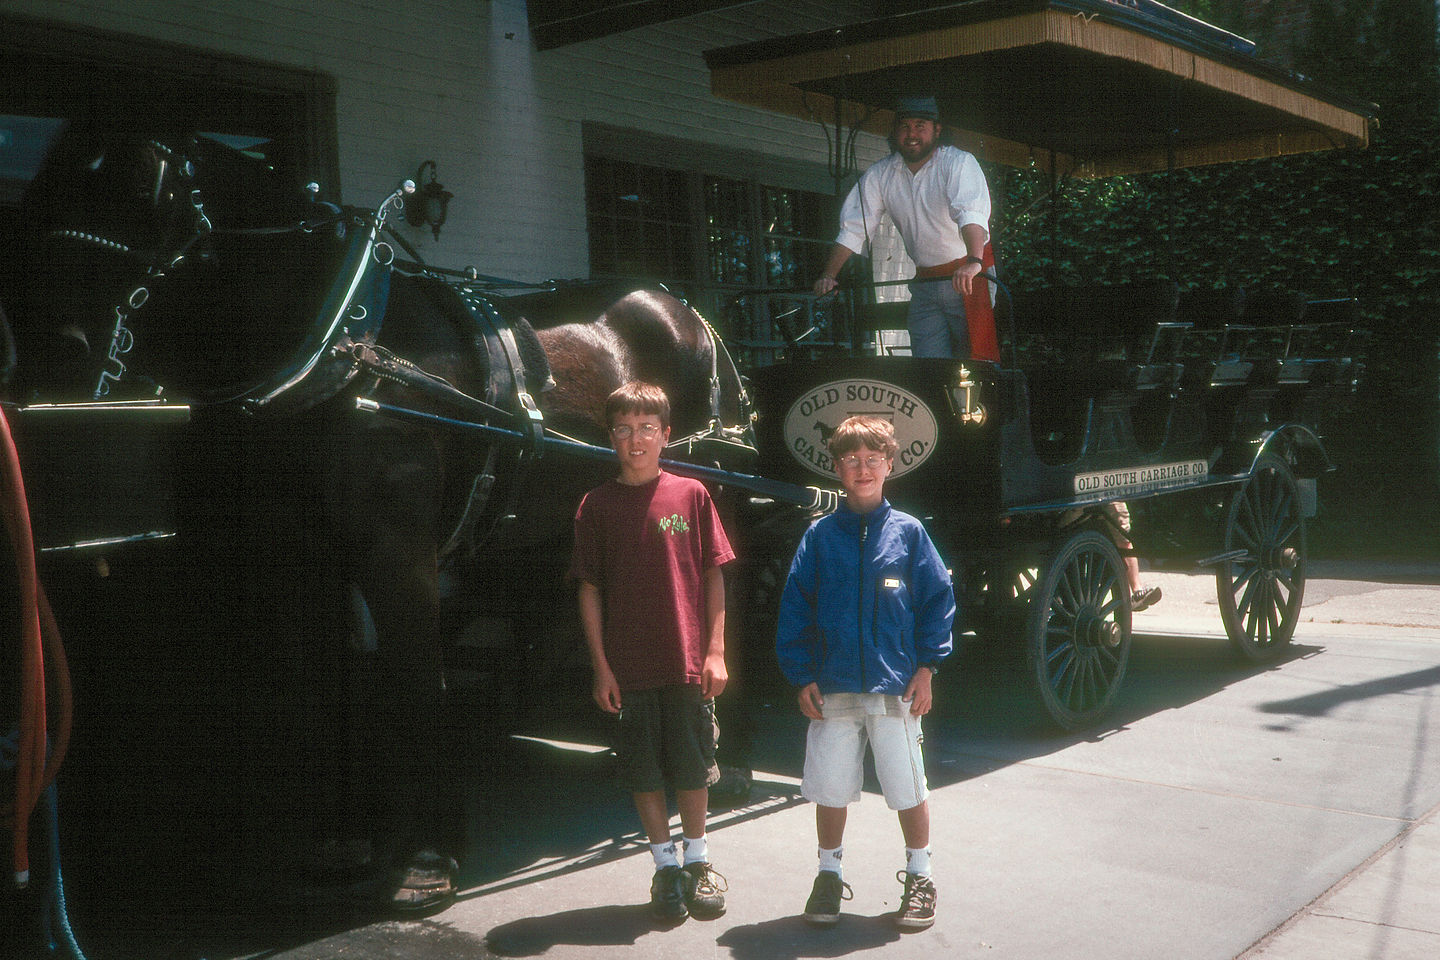 Boys with horse-drawn carriage